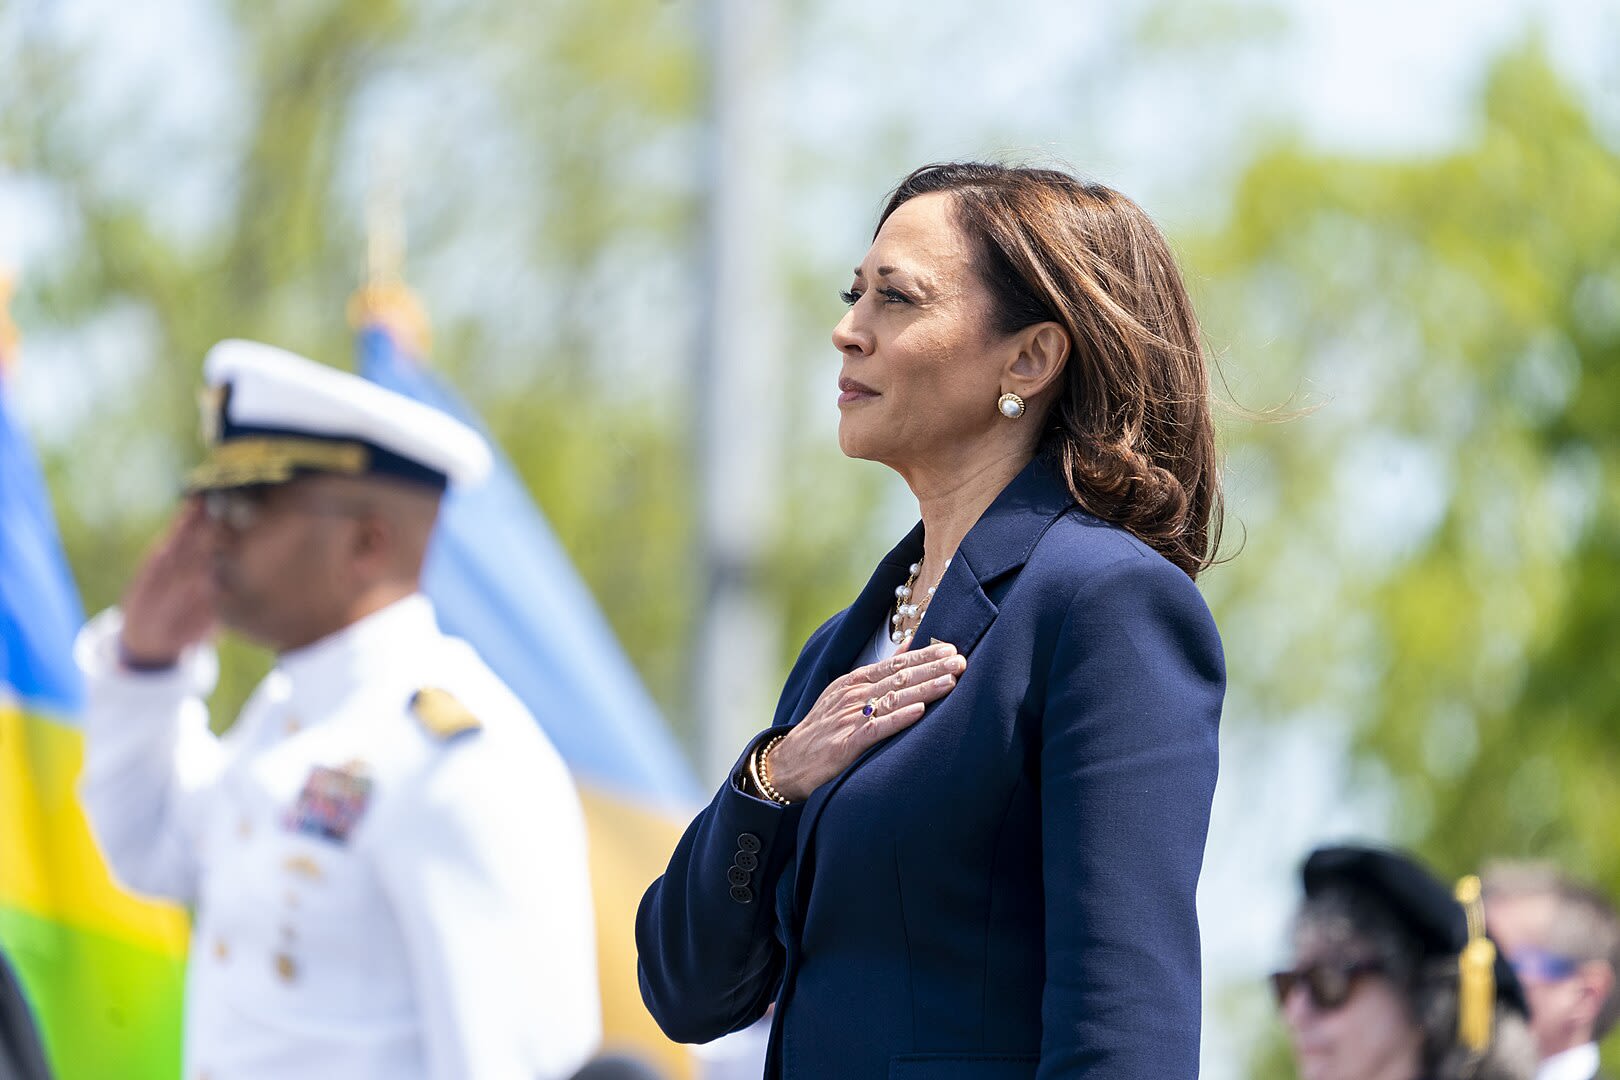 Fact Check: Yes, Kamala Harris Introduced Herself as 'Woman Sitting at the Table' in a 'Blue Suit'? Here's Why